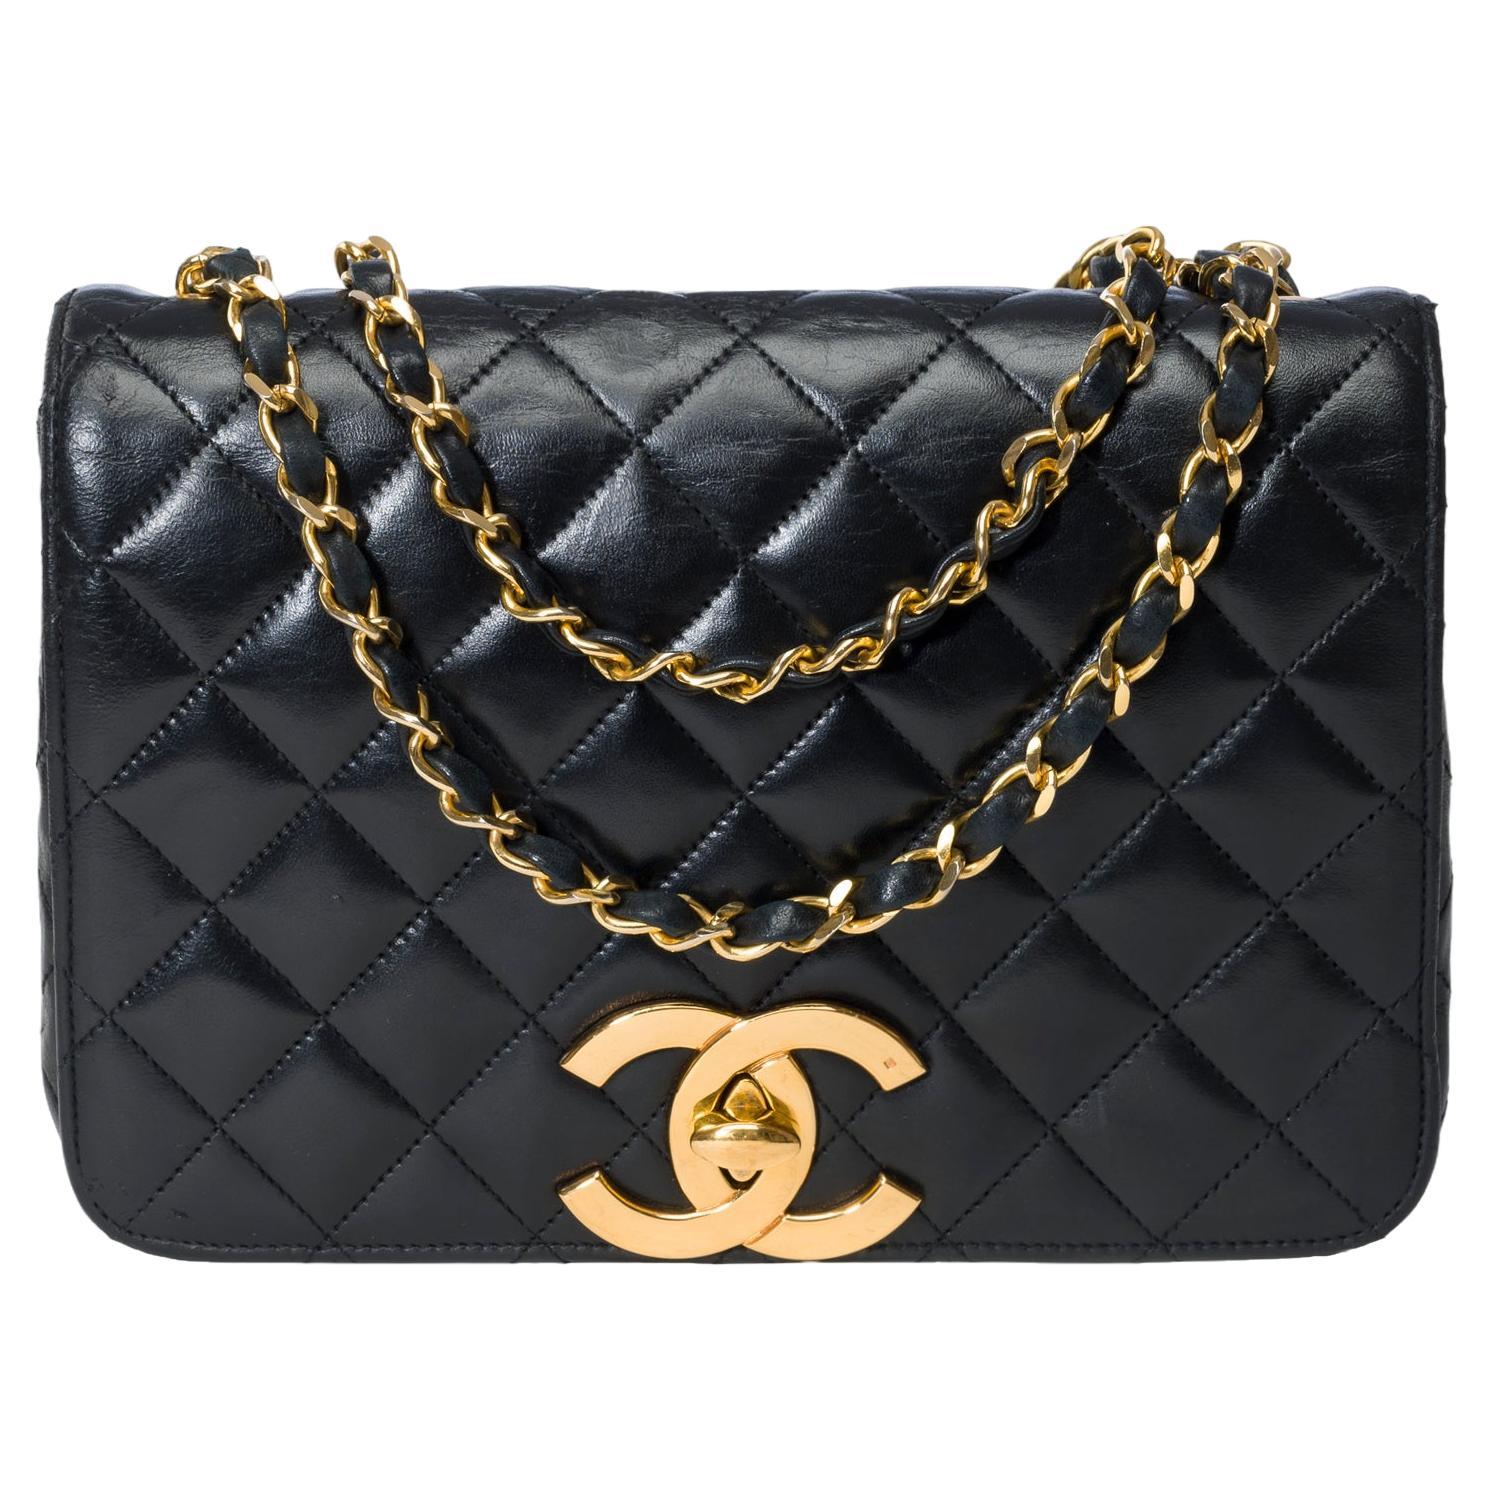 Chanel Classic Full Flap shoulder bag in black quilted lambskin leather, GHW For Sale